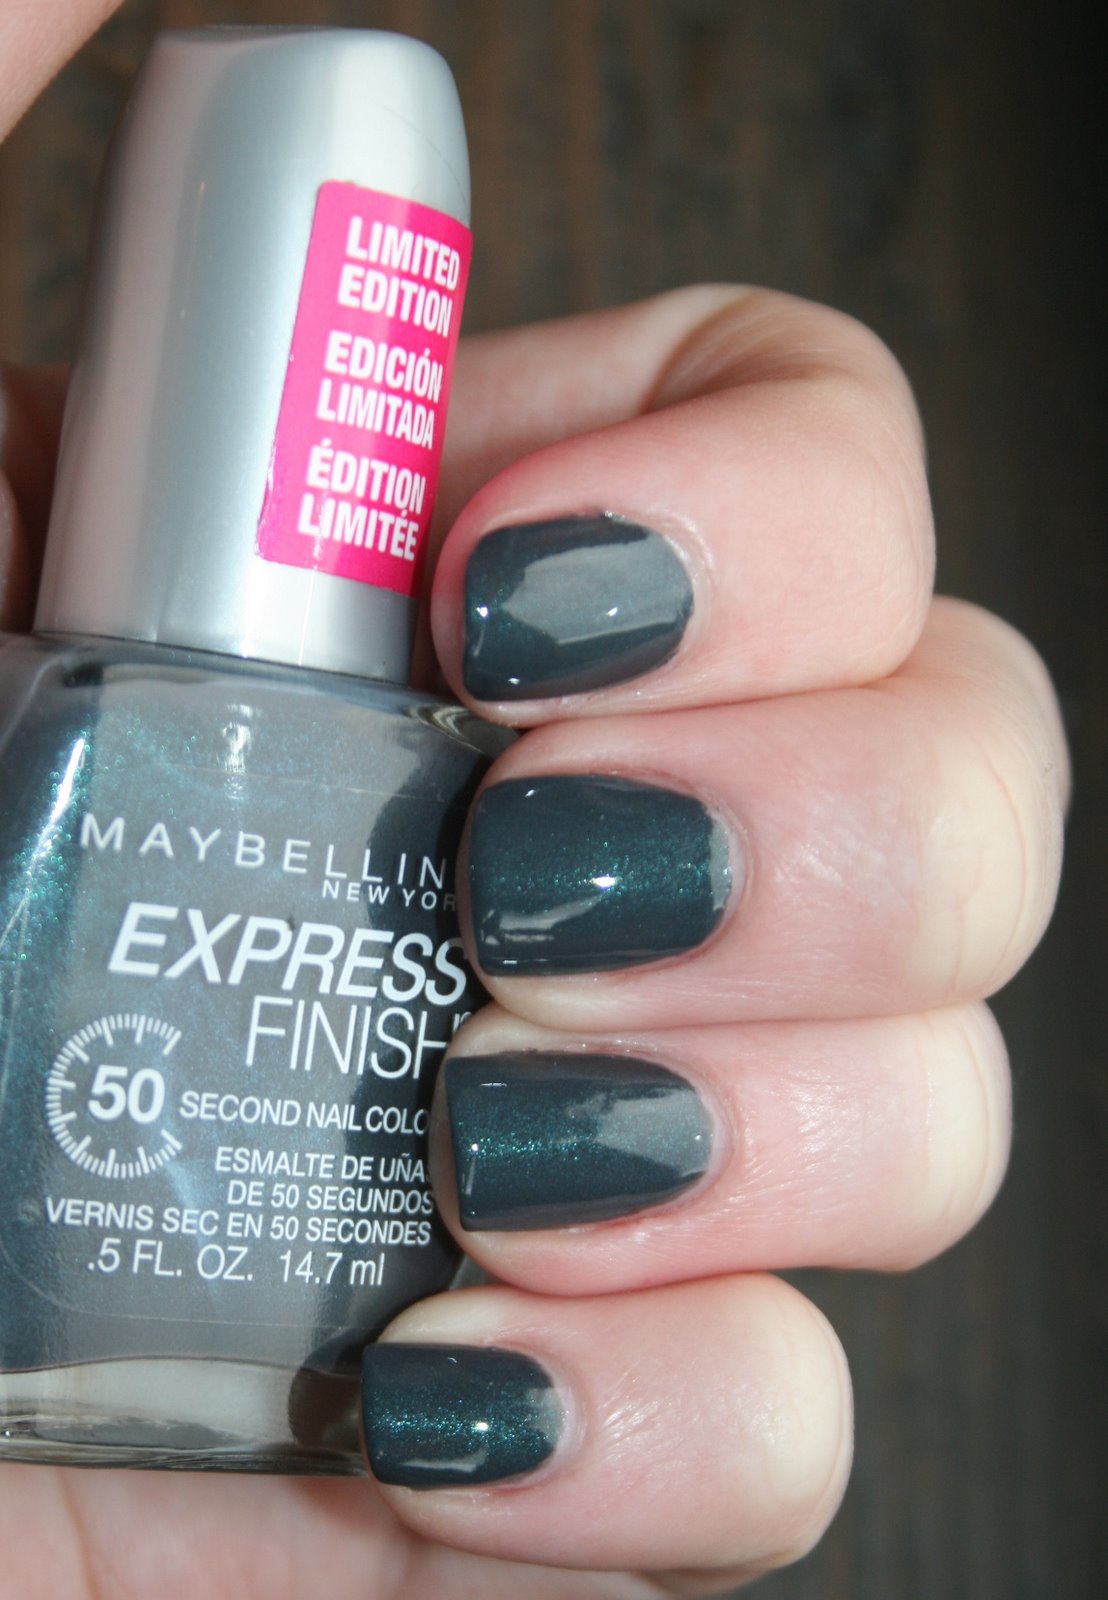 Maybelline Cool Couture swatch